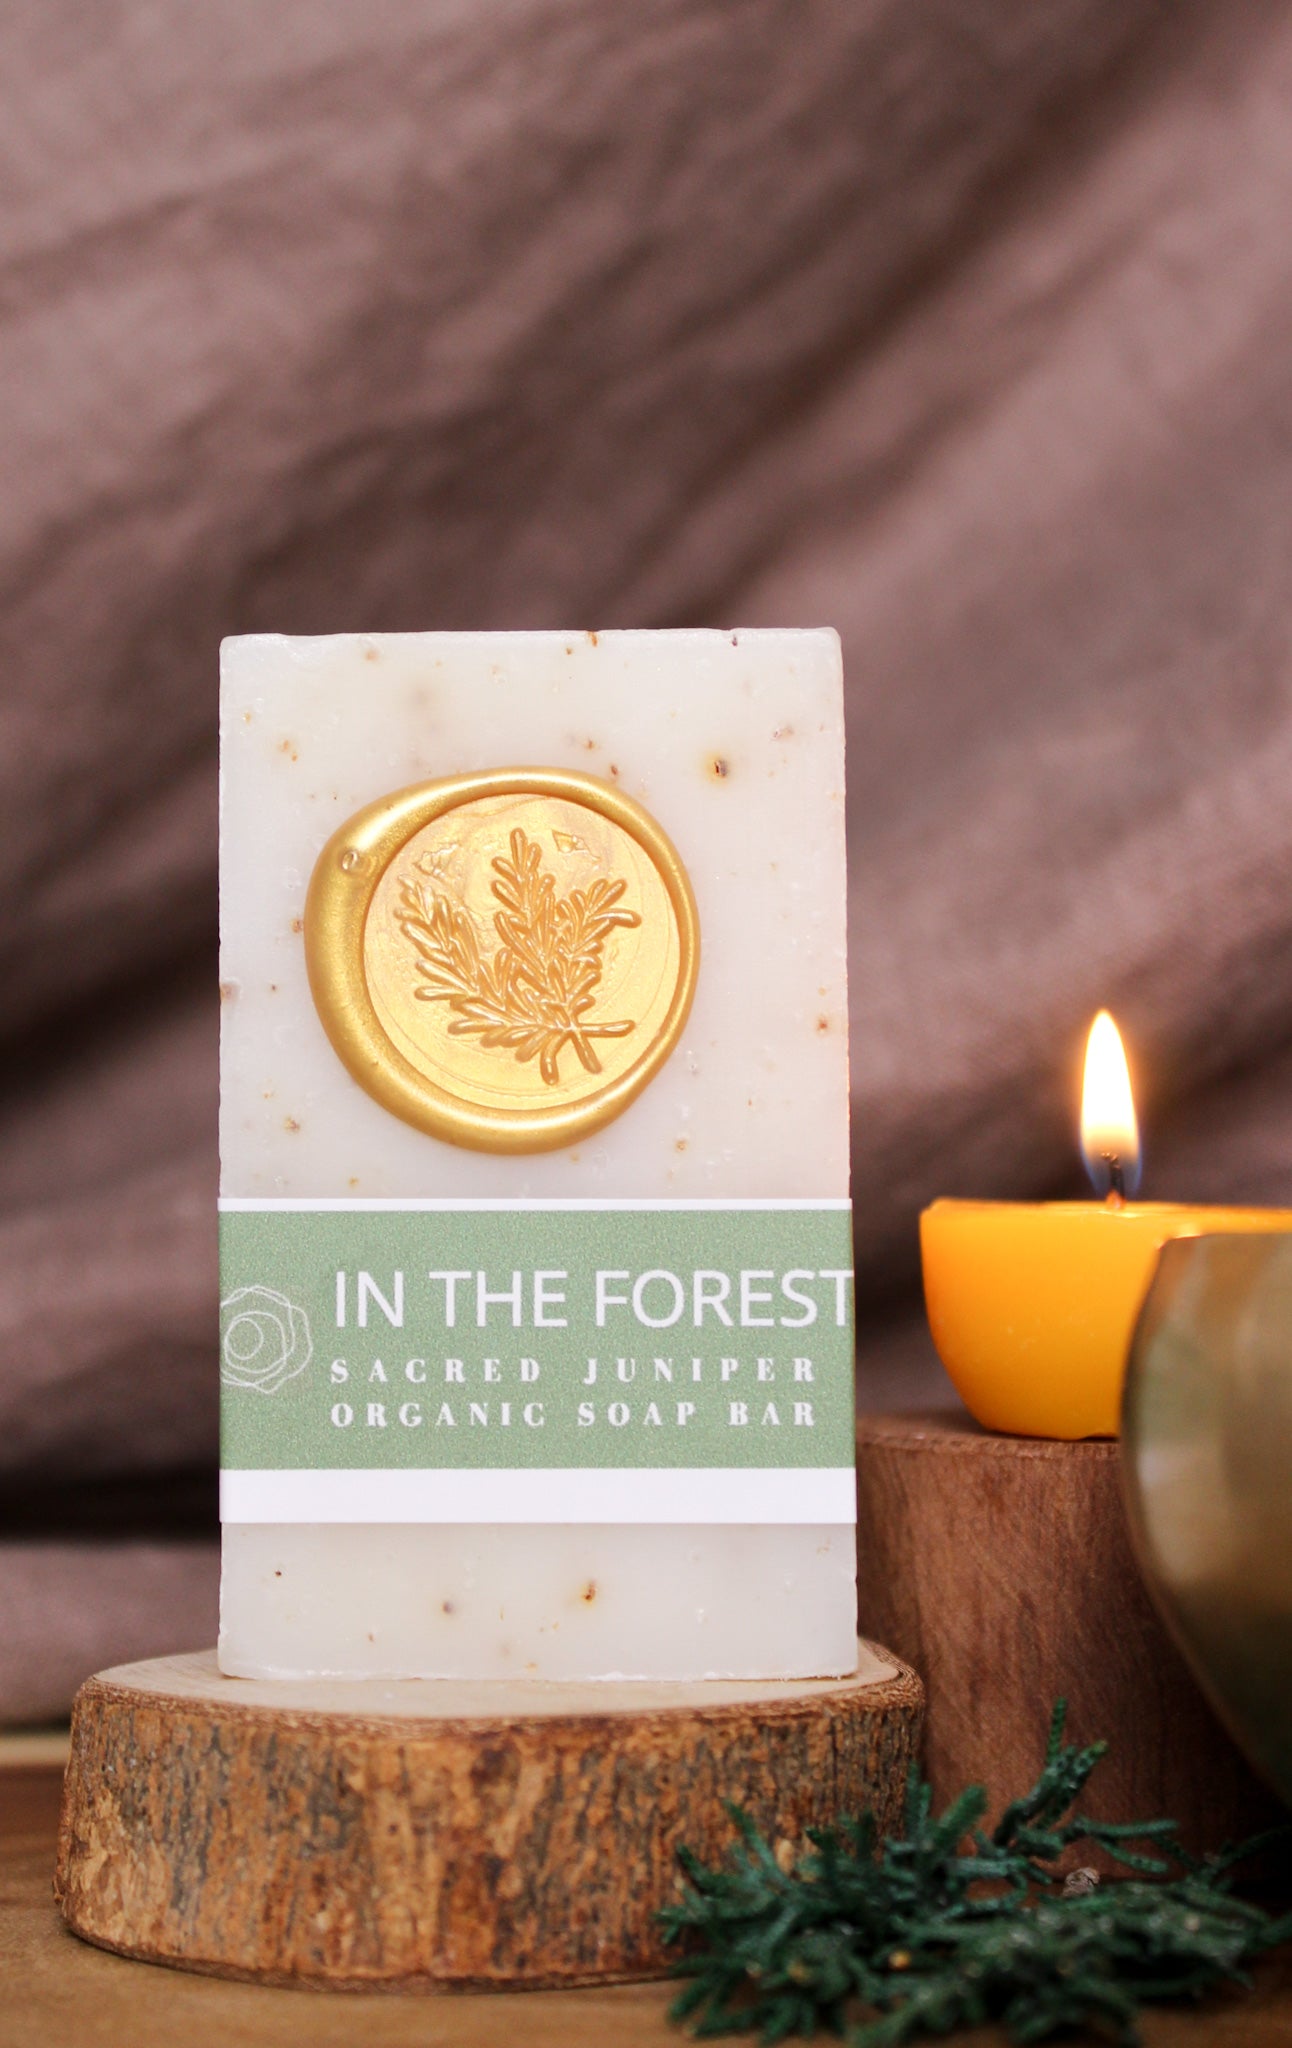 In The Forest Vegan Organic Bar Soap - Handmade with Natural Ingredients. Hidden Forest Naturals